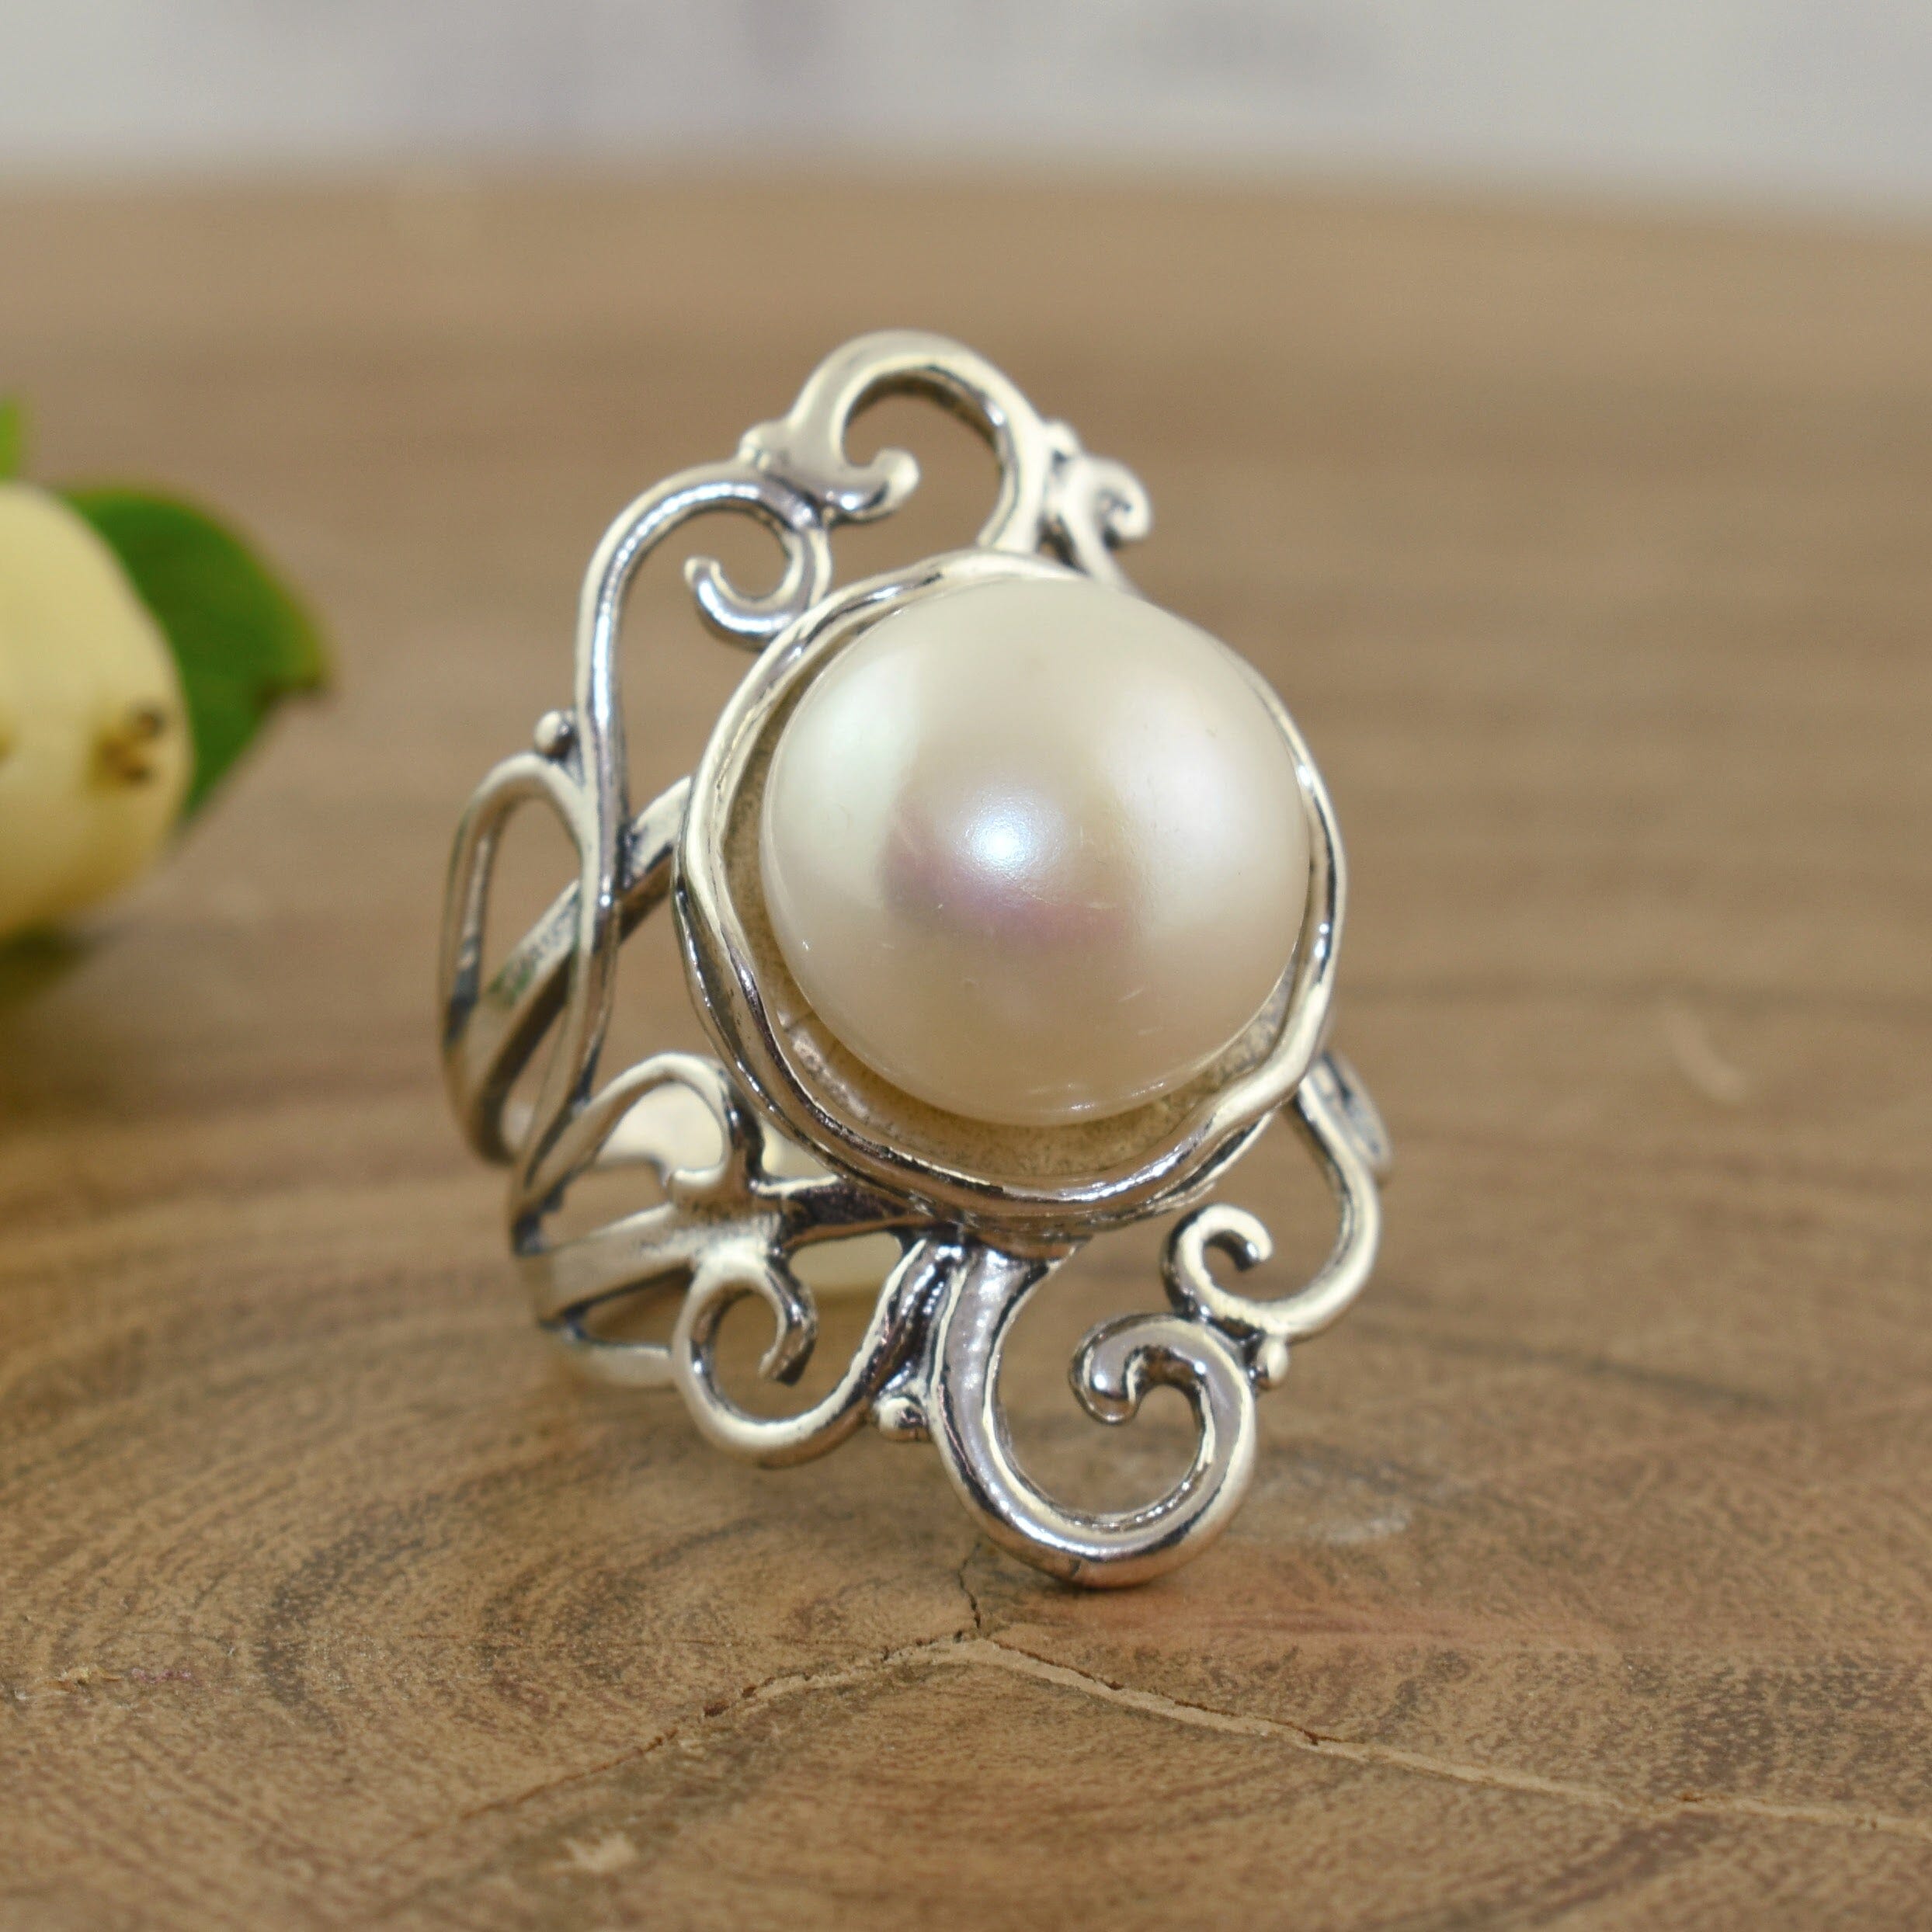 .925 sterling silver ring with swirl accents and featuring a sizable freshwater pearl